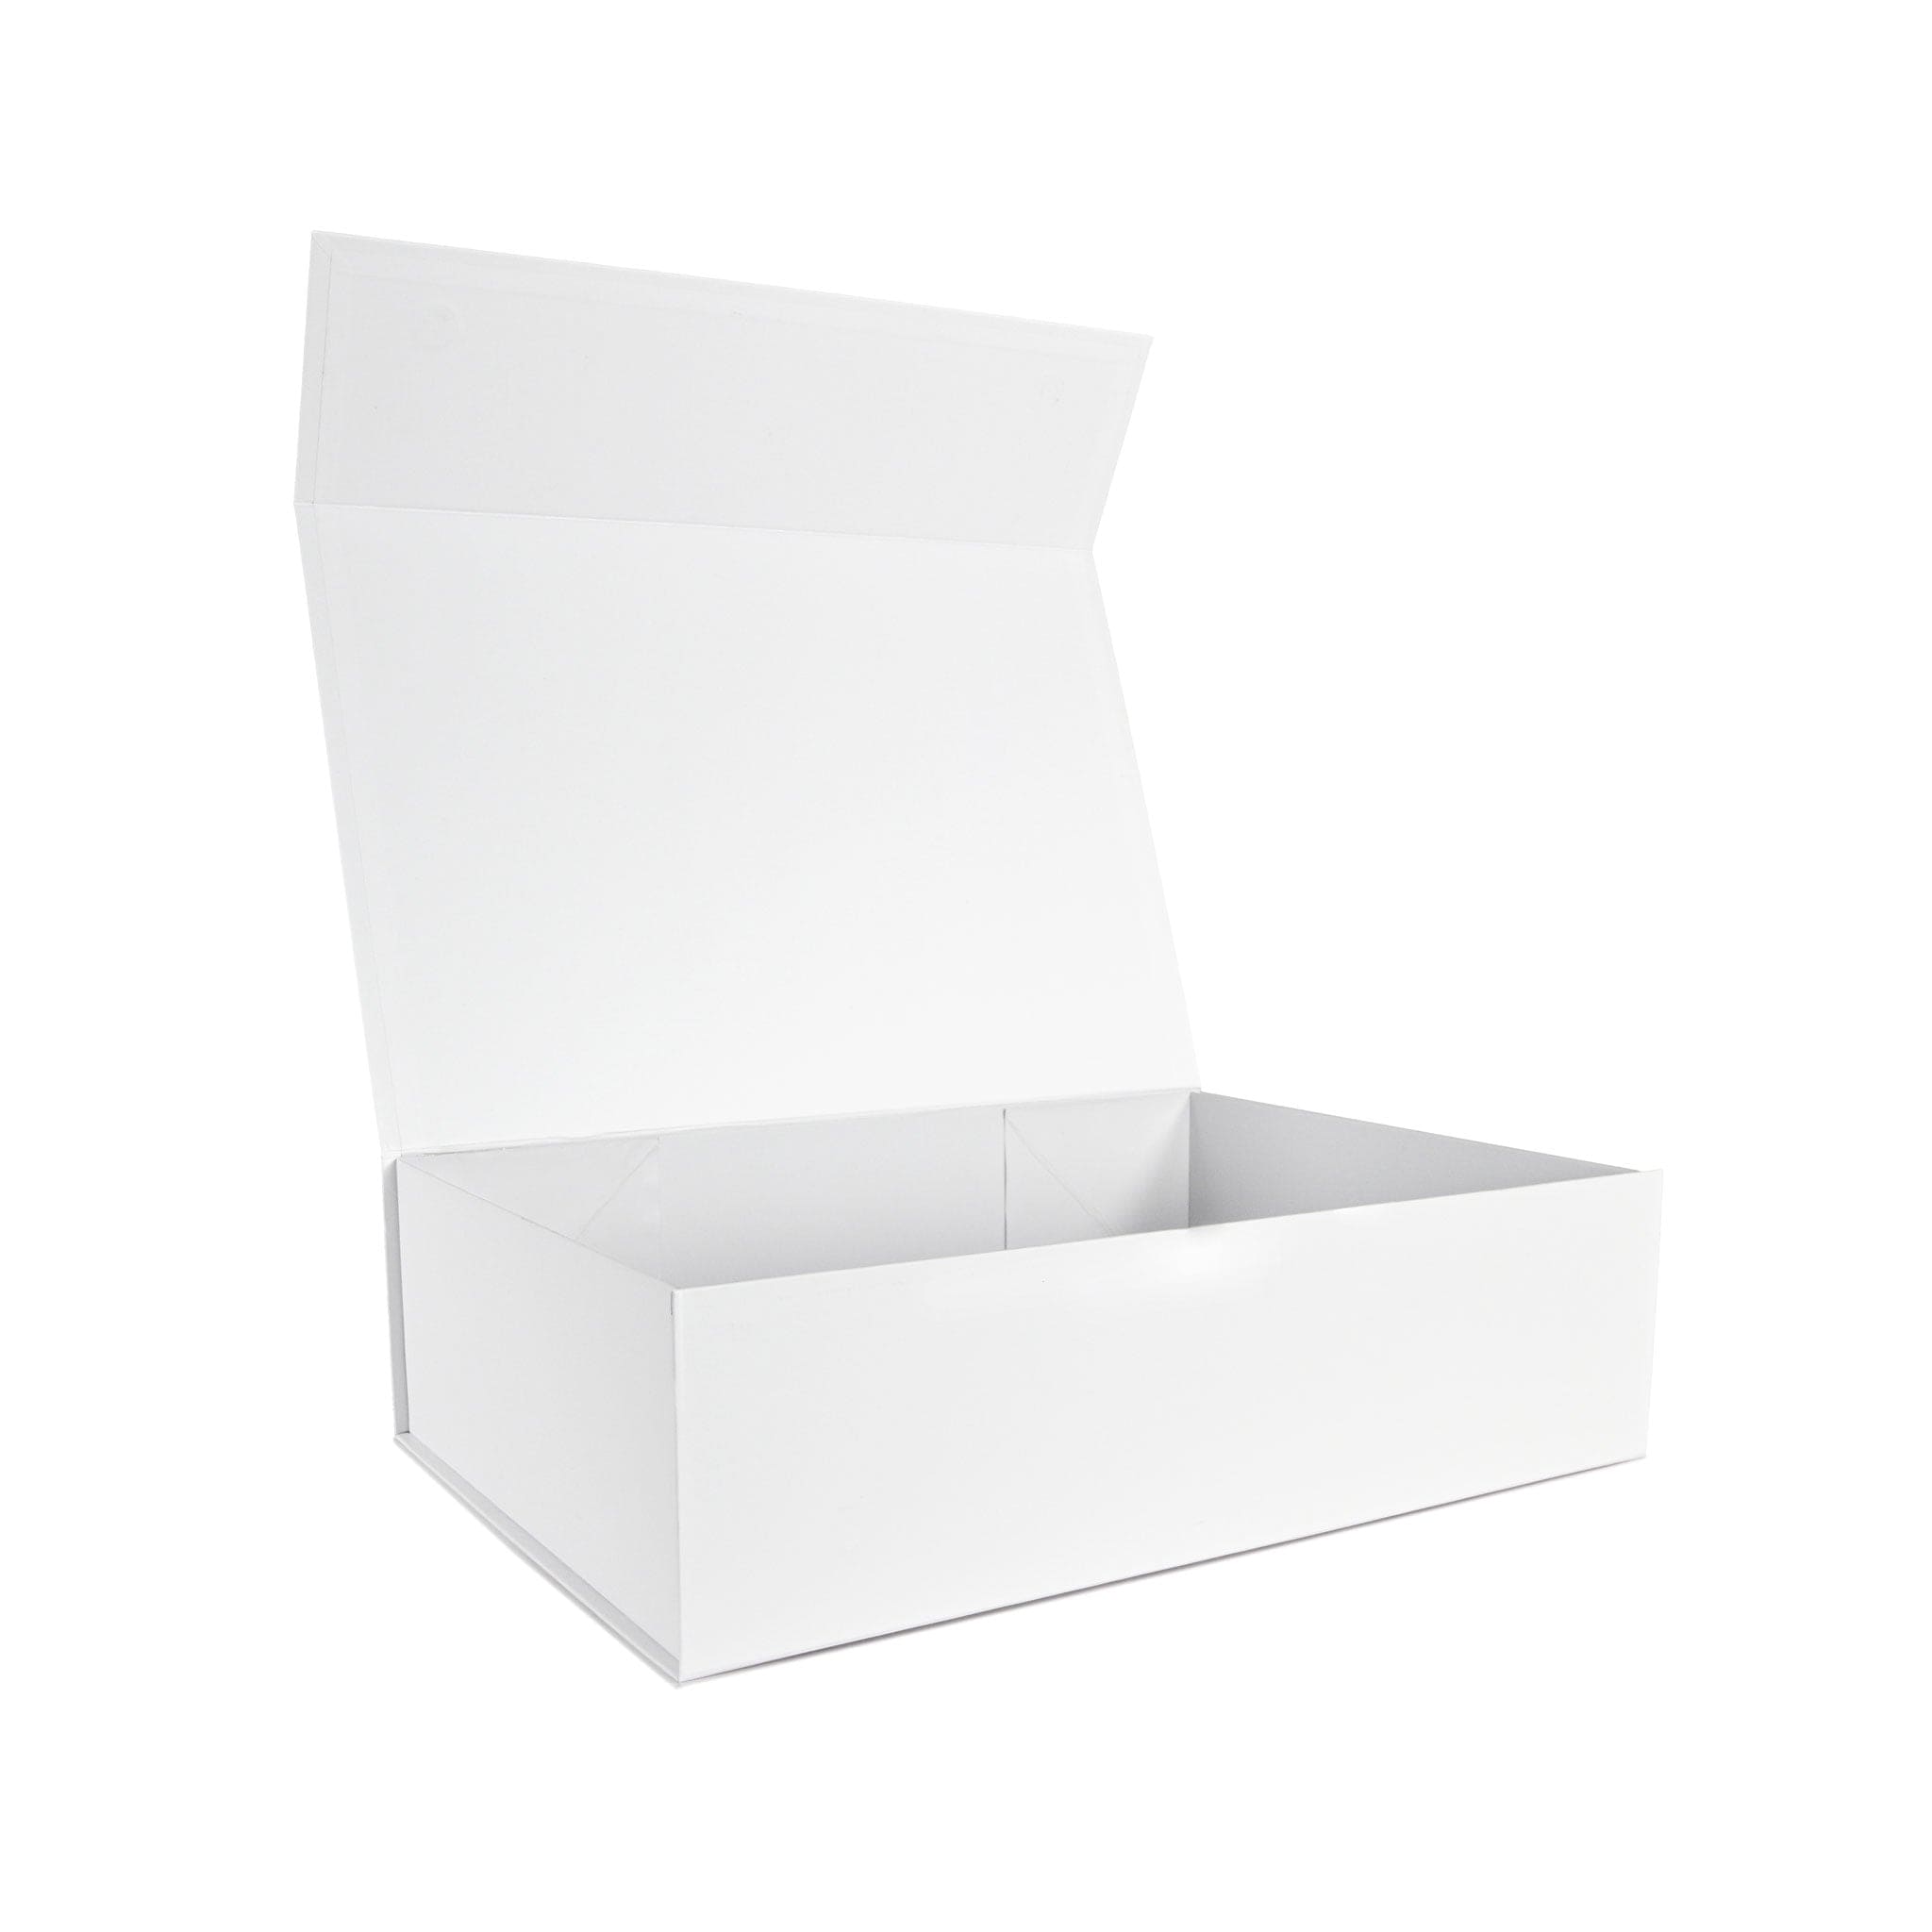 Empty Premium Magnetic White Gift Box - Large - NEON Packaging